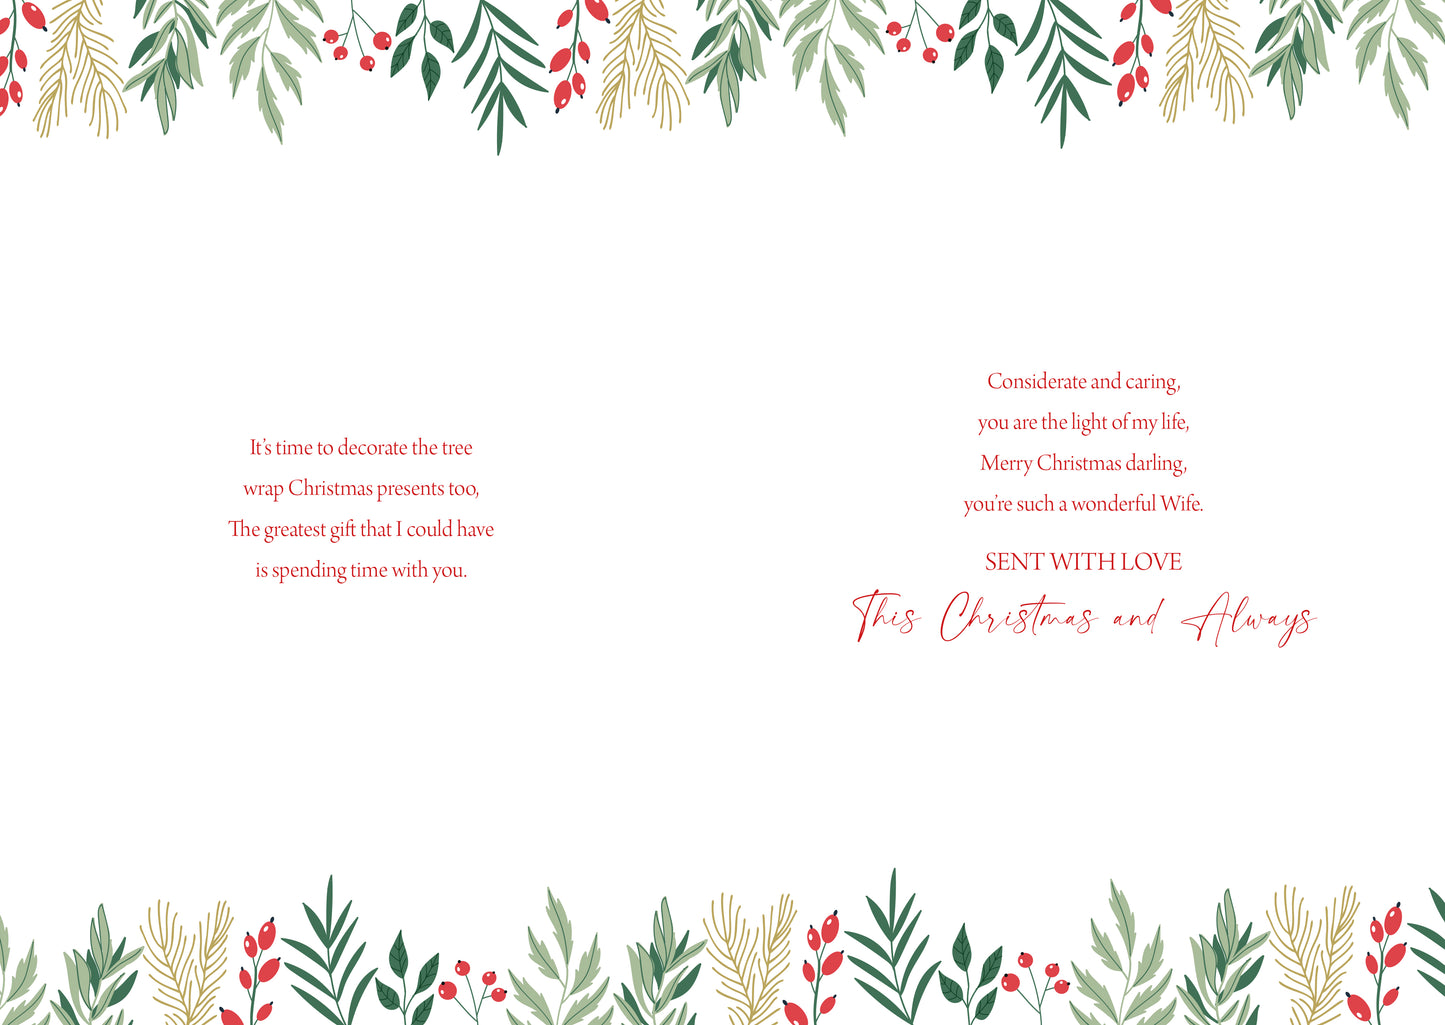 Wife Red Christmas Card